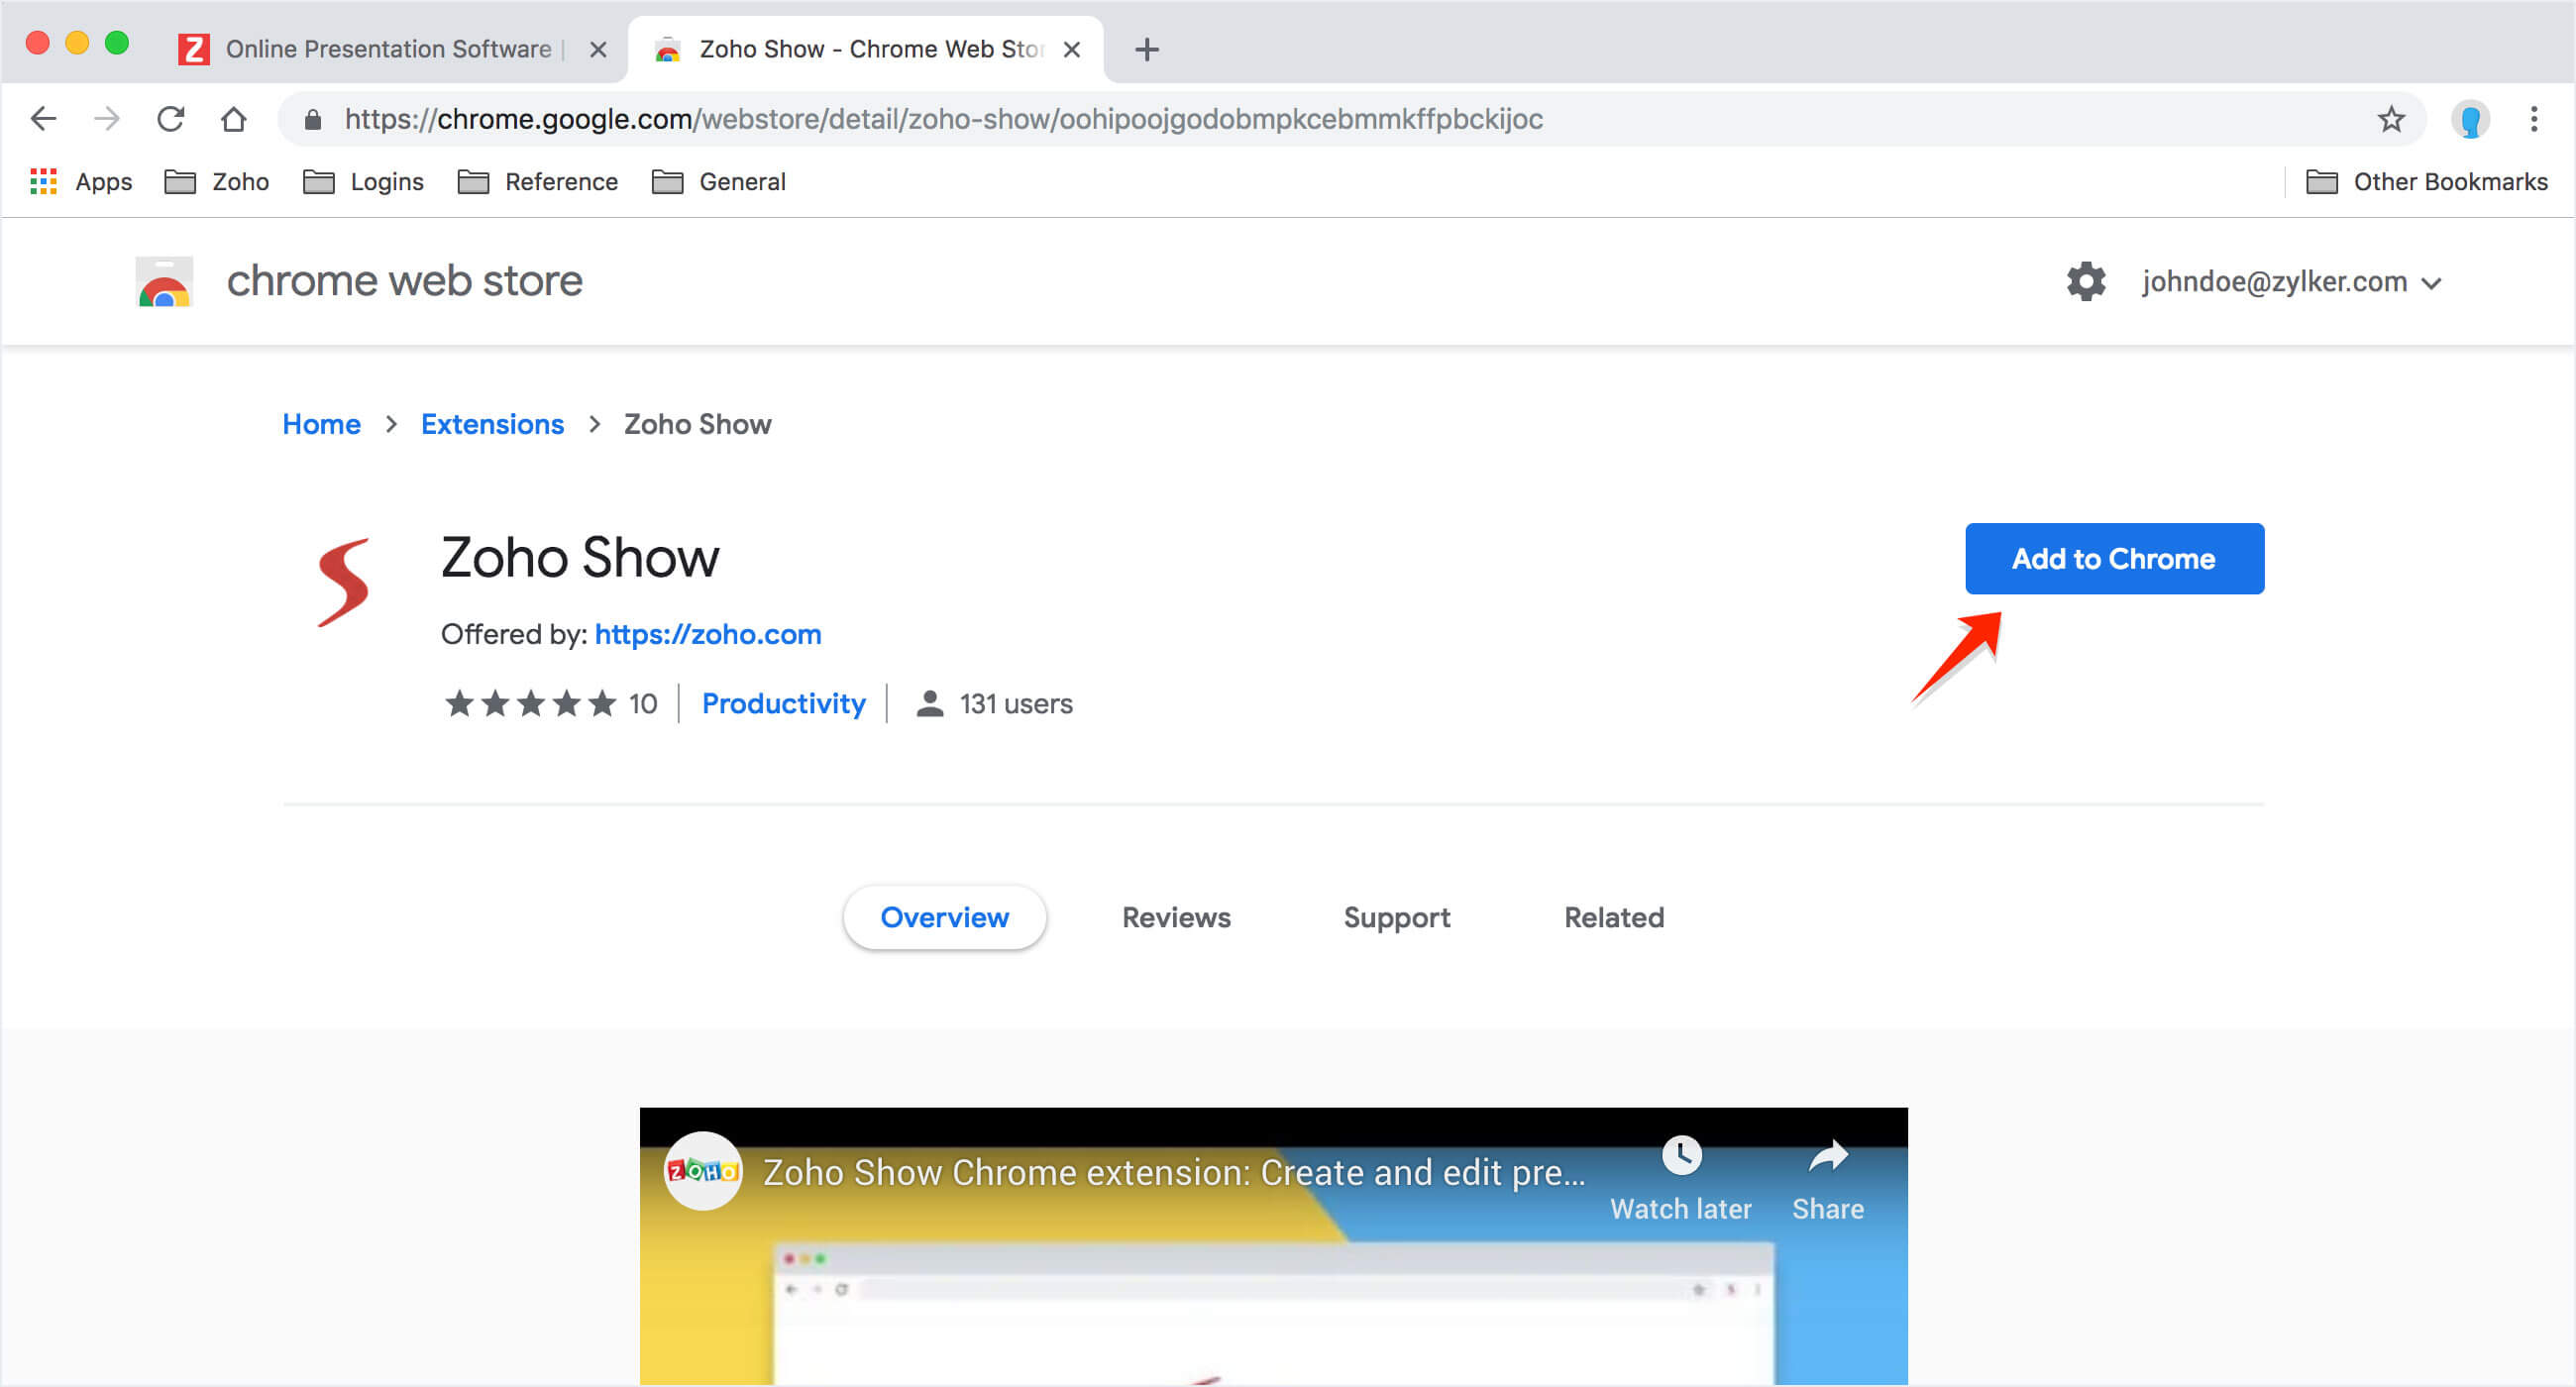 Choose Add to Chrome for Zoho Show extension